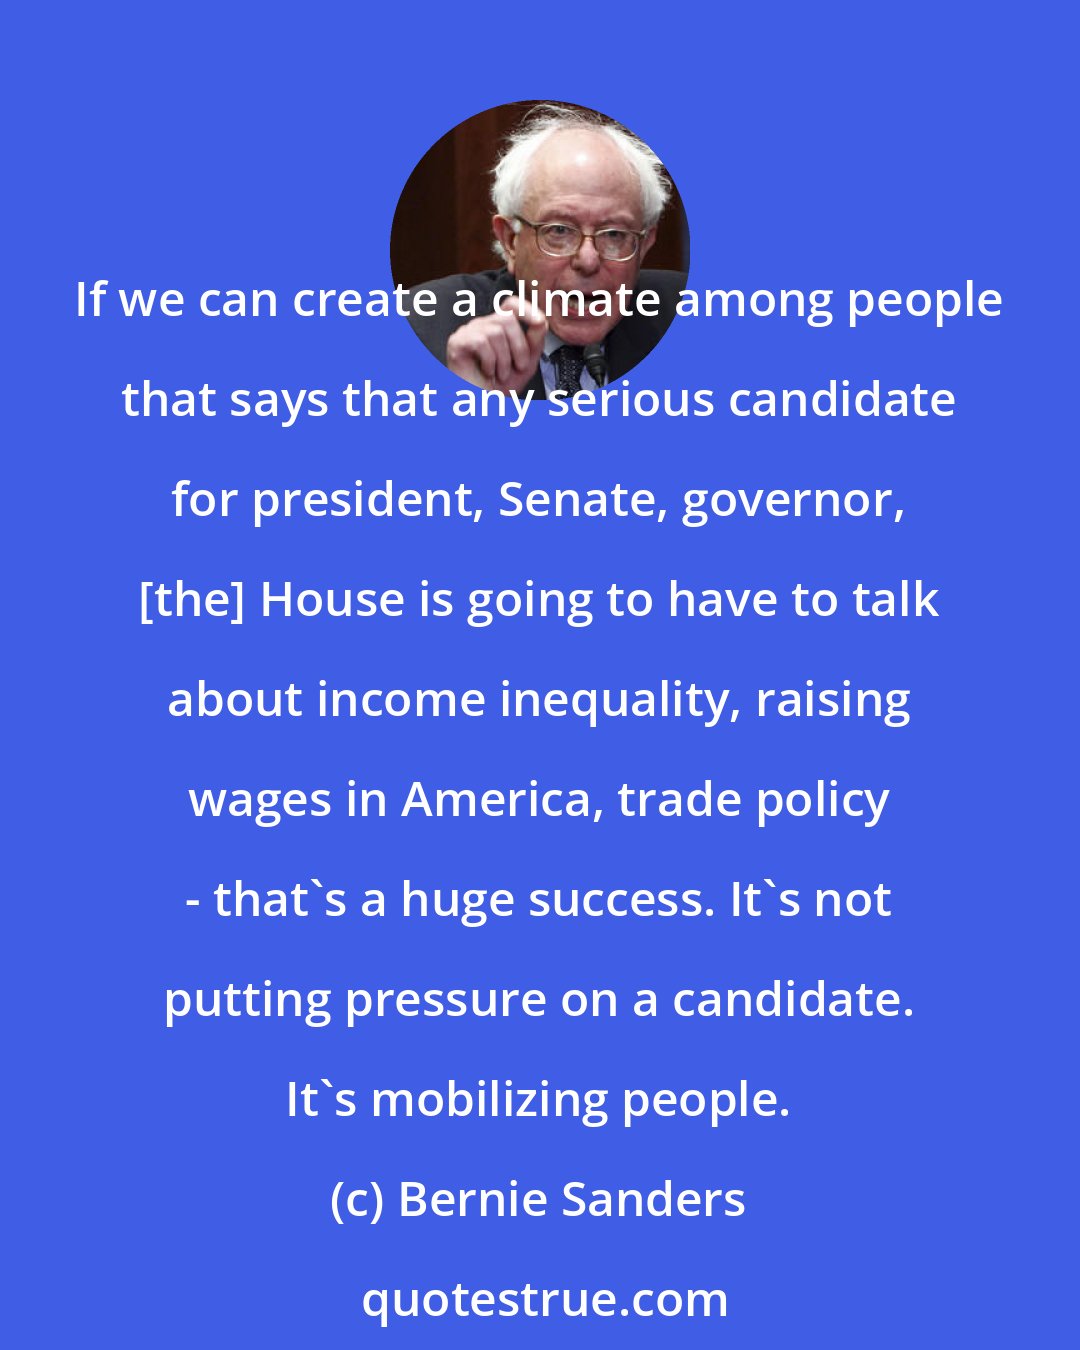 Bernie Sanders: If we can create a climate among people that says that any serious candidate for president, Senate, governor, [the] House is going to have to talk about income inequality, raising wages in America, trade policy - that's a huge success. It's not putting pressure on a candidate. It's mobilizing people.